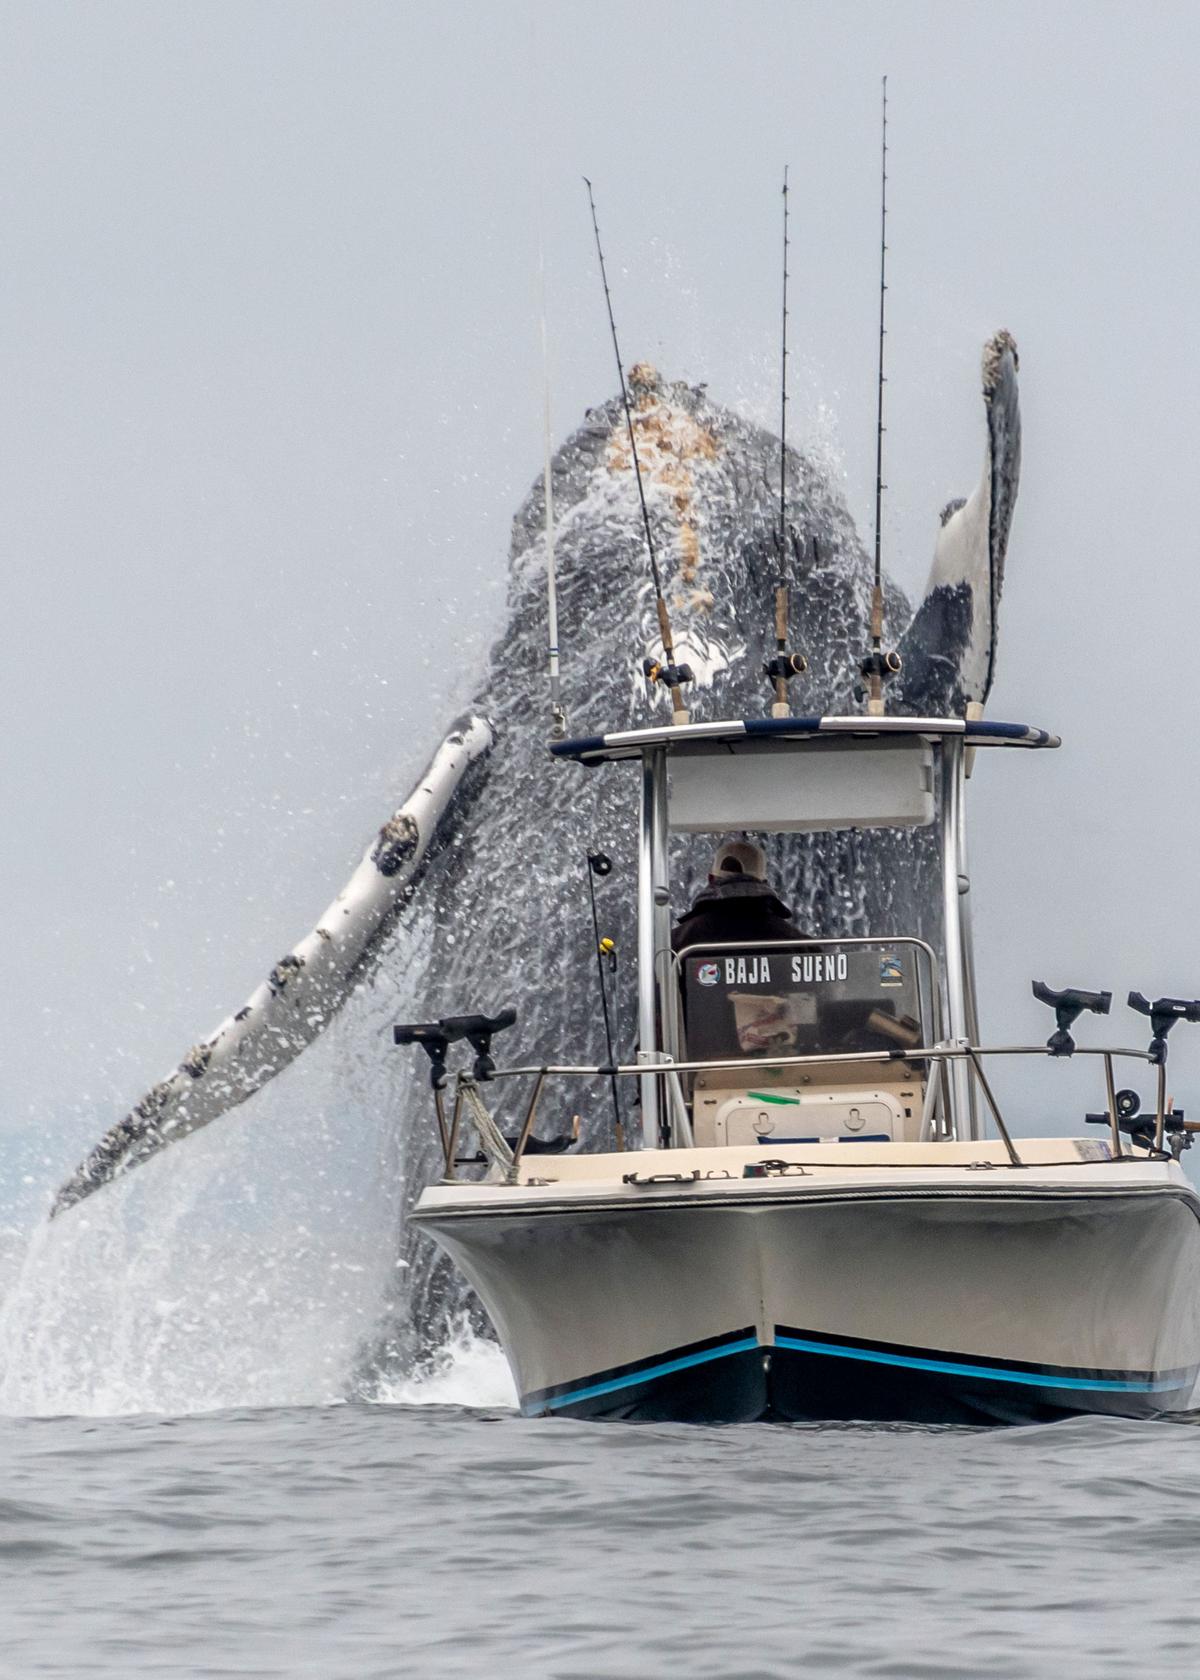 A whale breaching very close to a fisherman's boat off Monterey Bay, California. (Courtesy of Douglas Croft/Caters News)